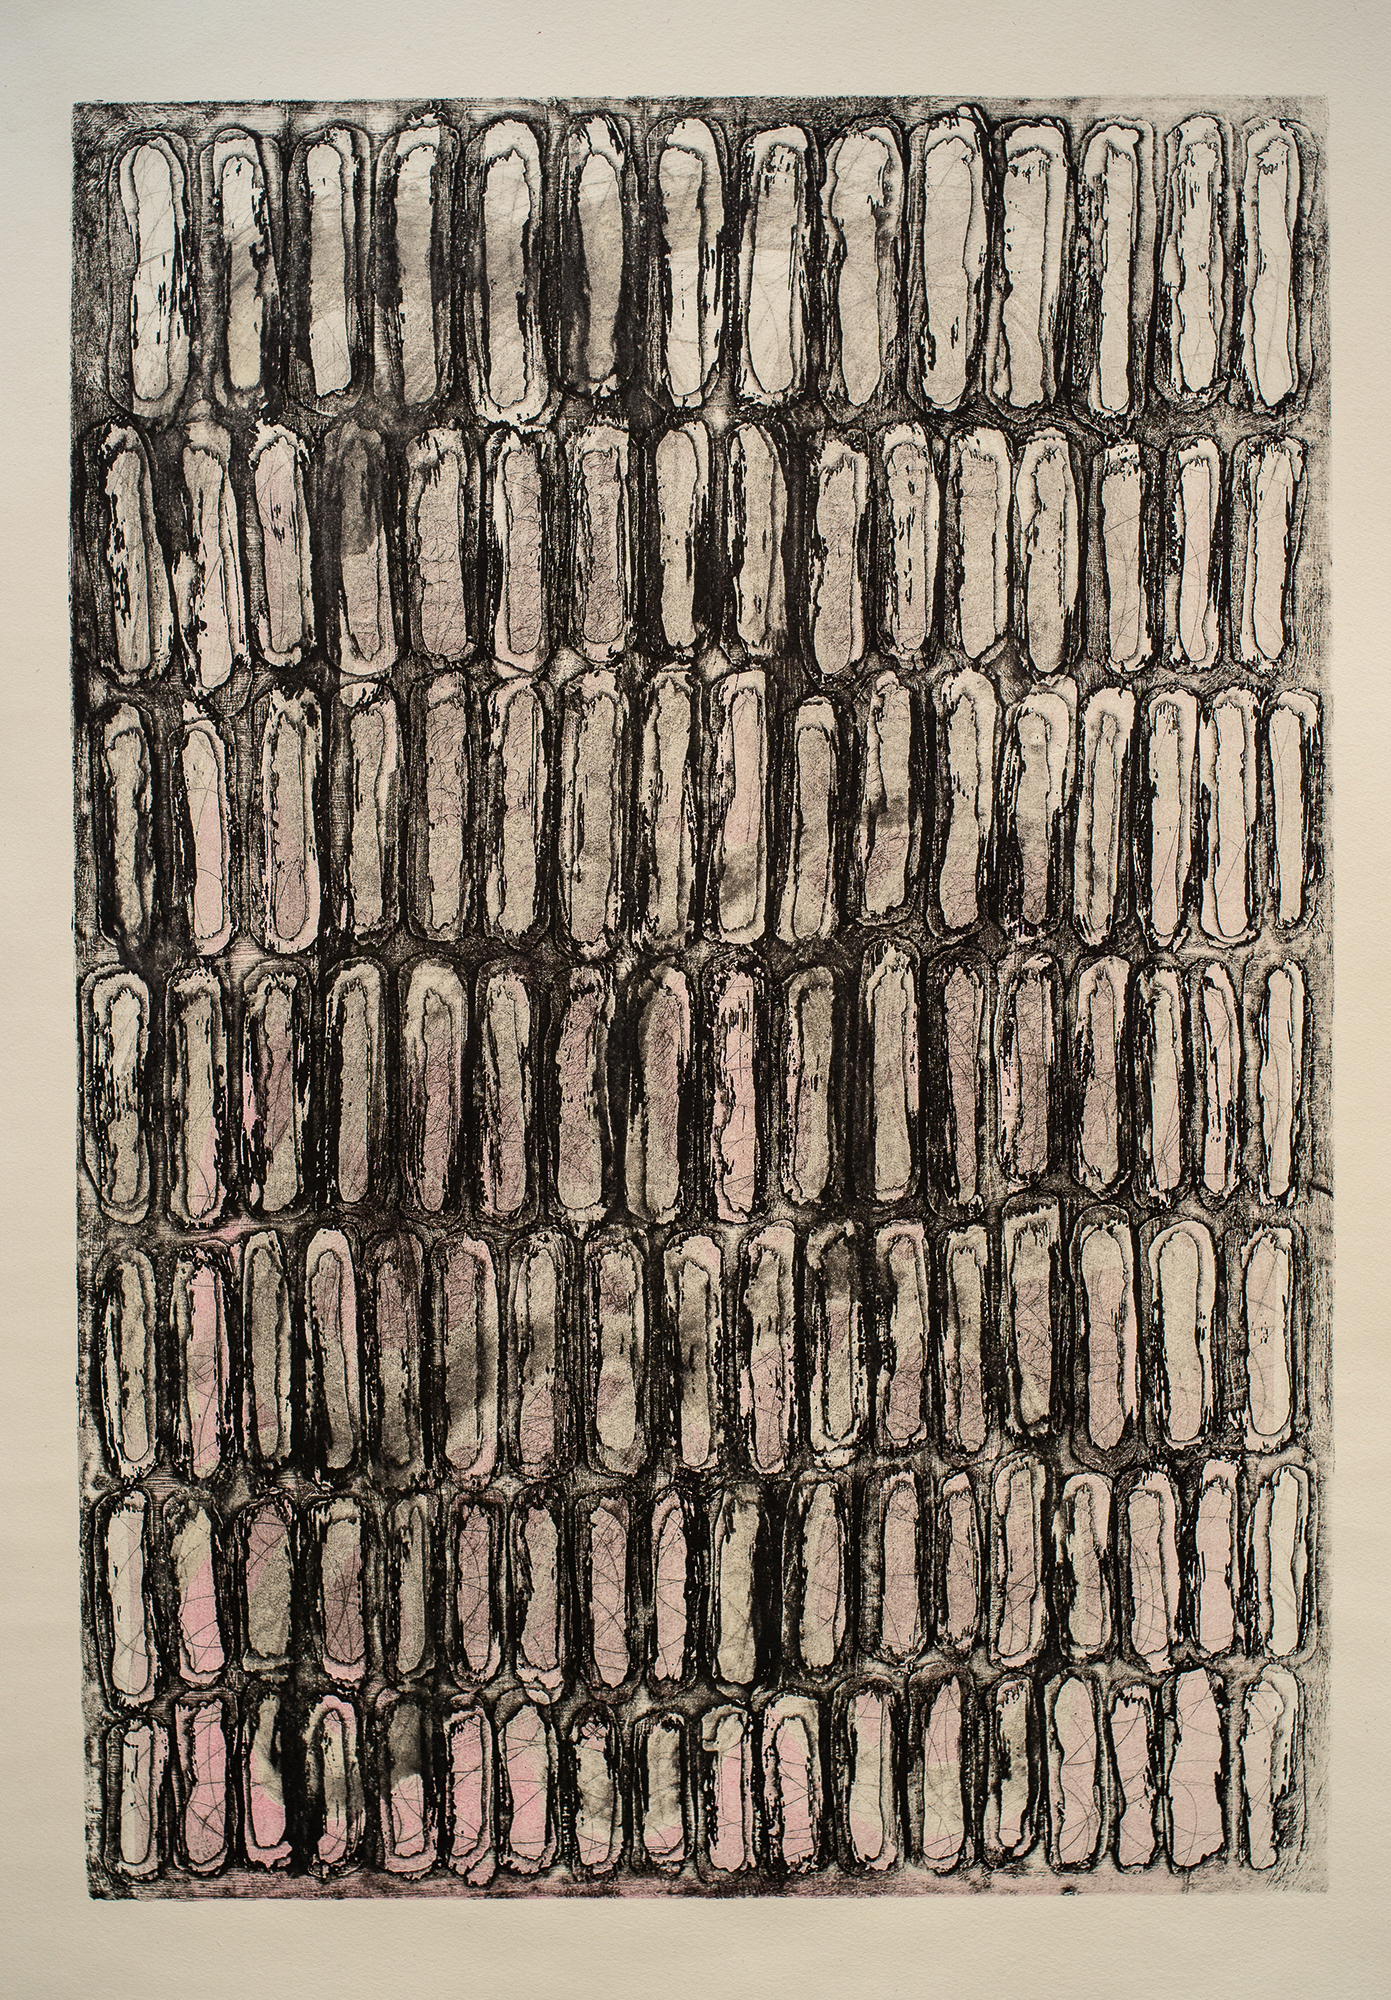   One Hundred and Eighteen Marks , copperplate open bite, drypoint and aquatint etching, 22-1/4 x 33-1/2 inches 